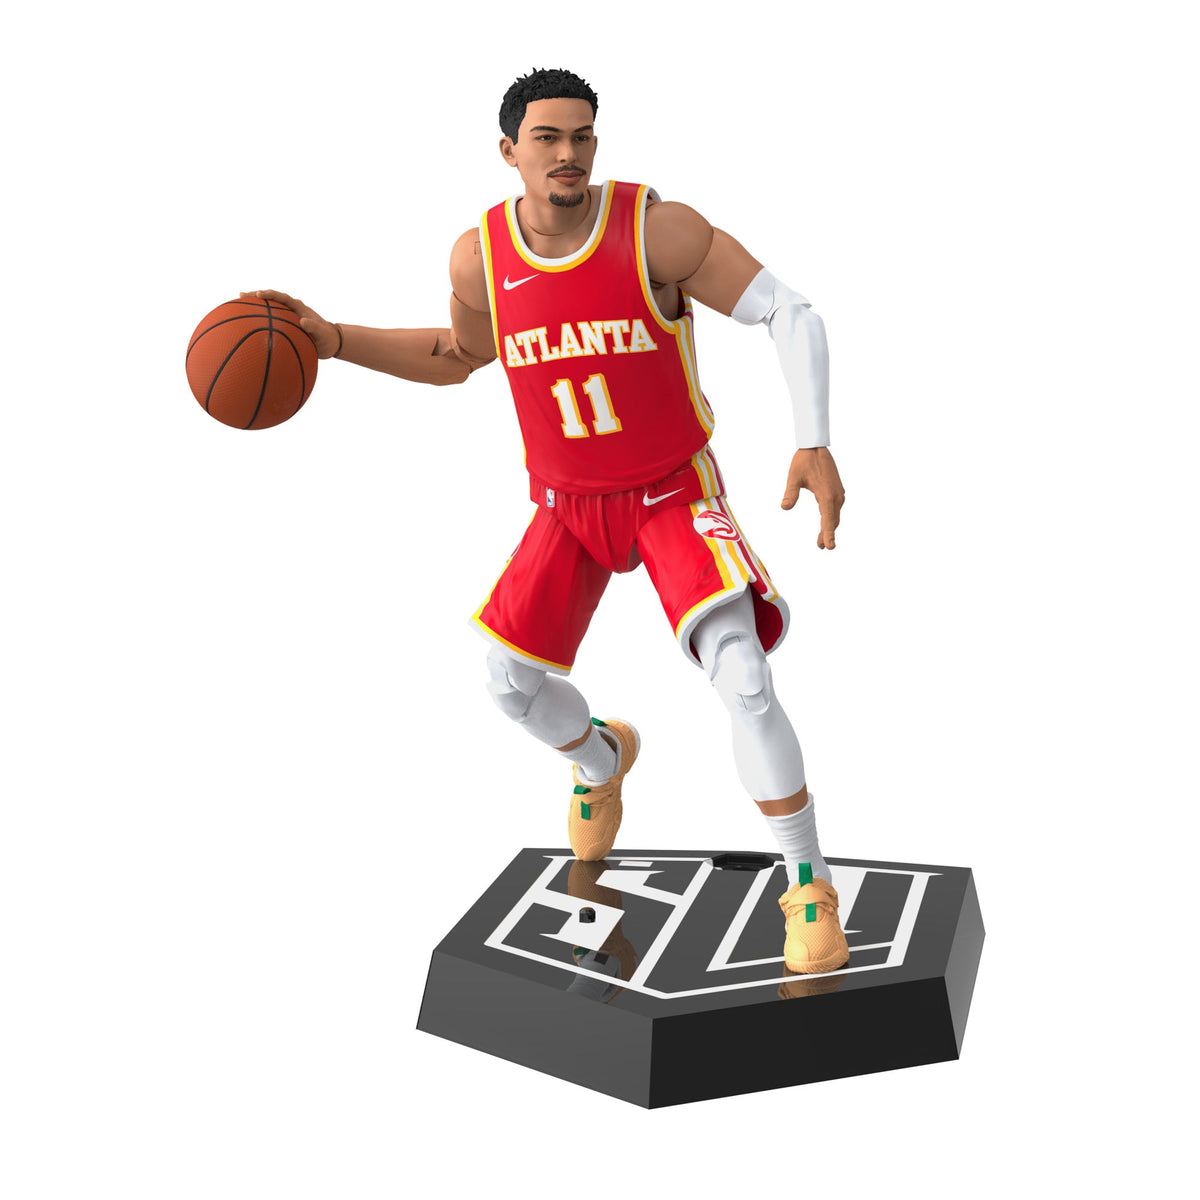 NBA Action Figures: Collect Action Figures Featuring NBA Stars